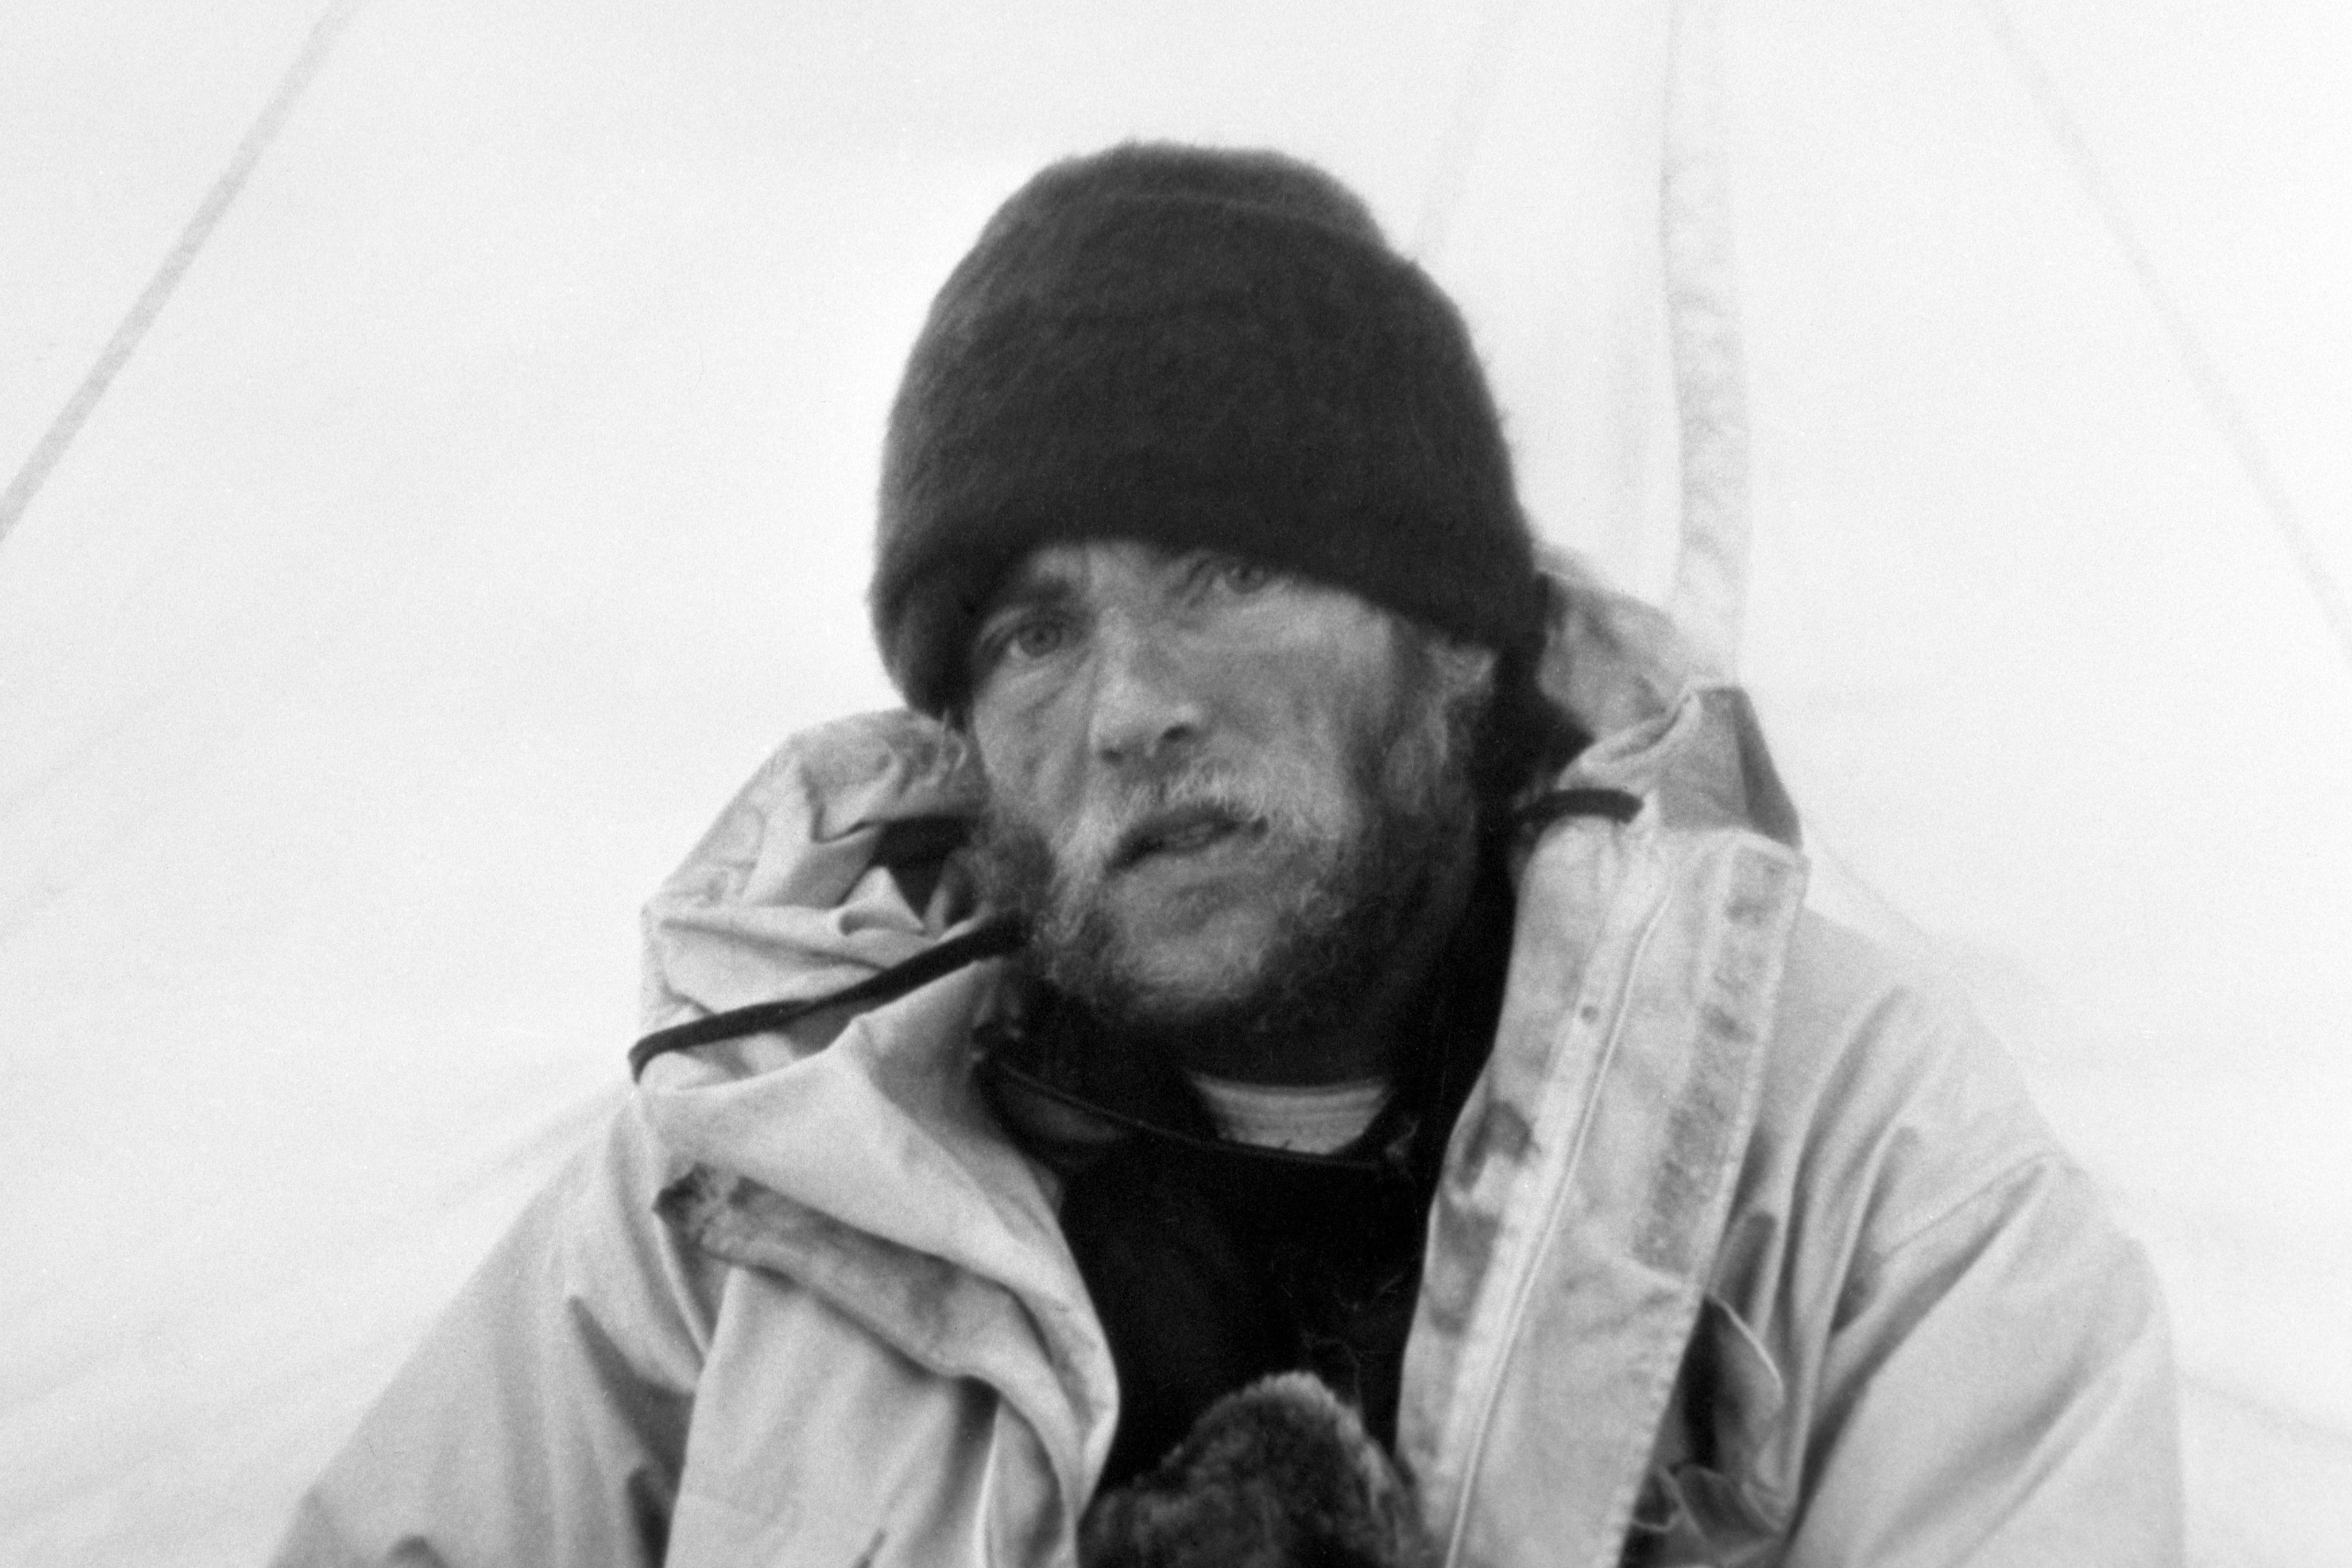 Michael “Bronco” Lane paid a high price for climbing Everest in 1976